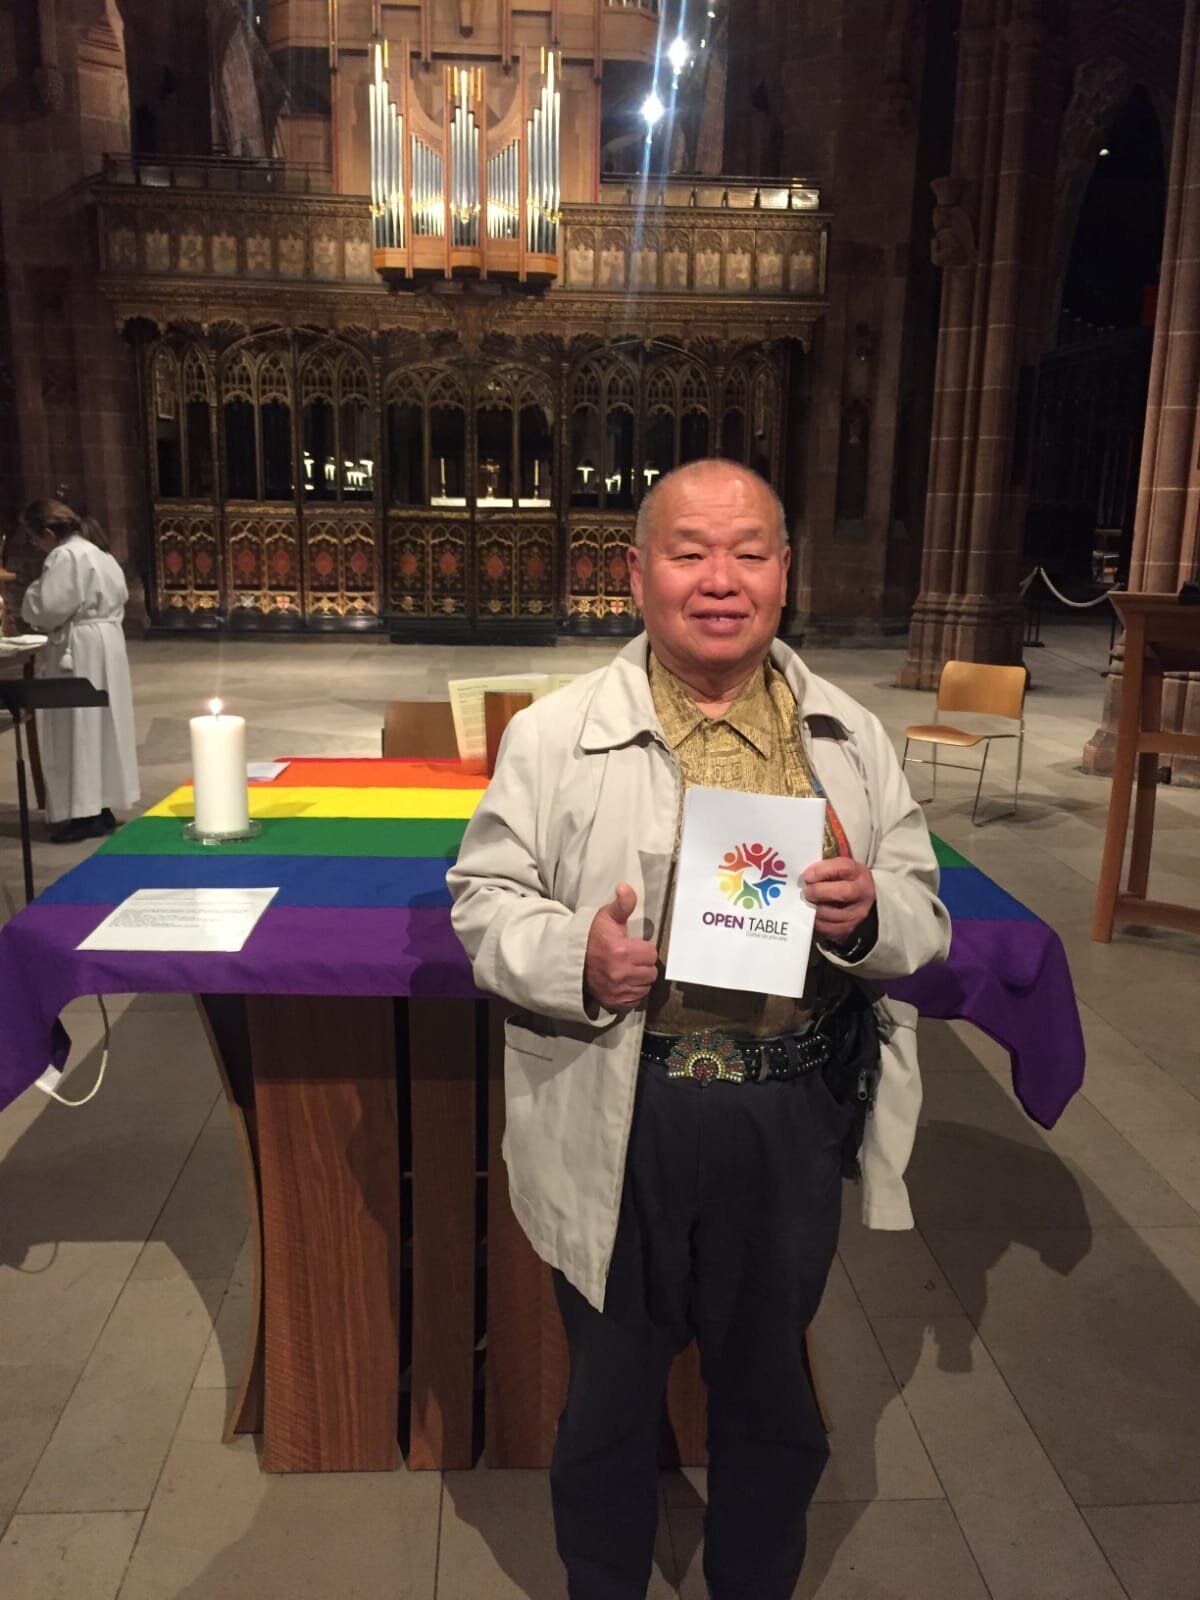 Sam at an Open Table communion service at Manchester Cathedral in September 2019